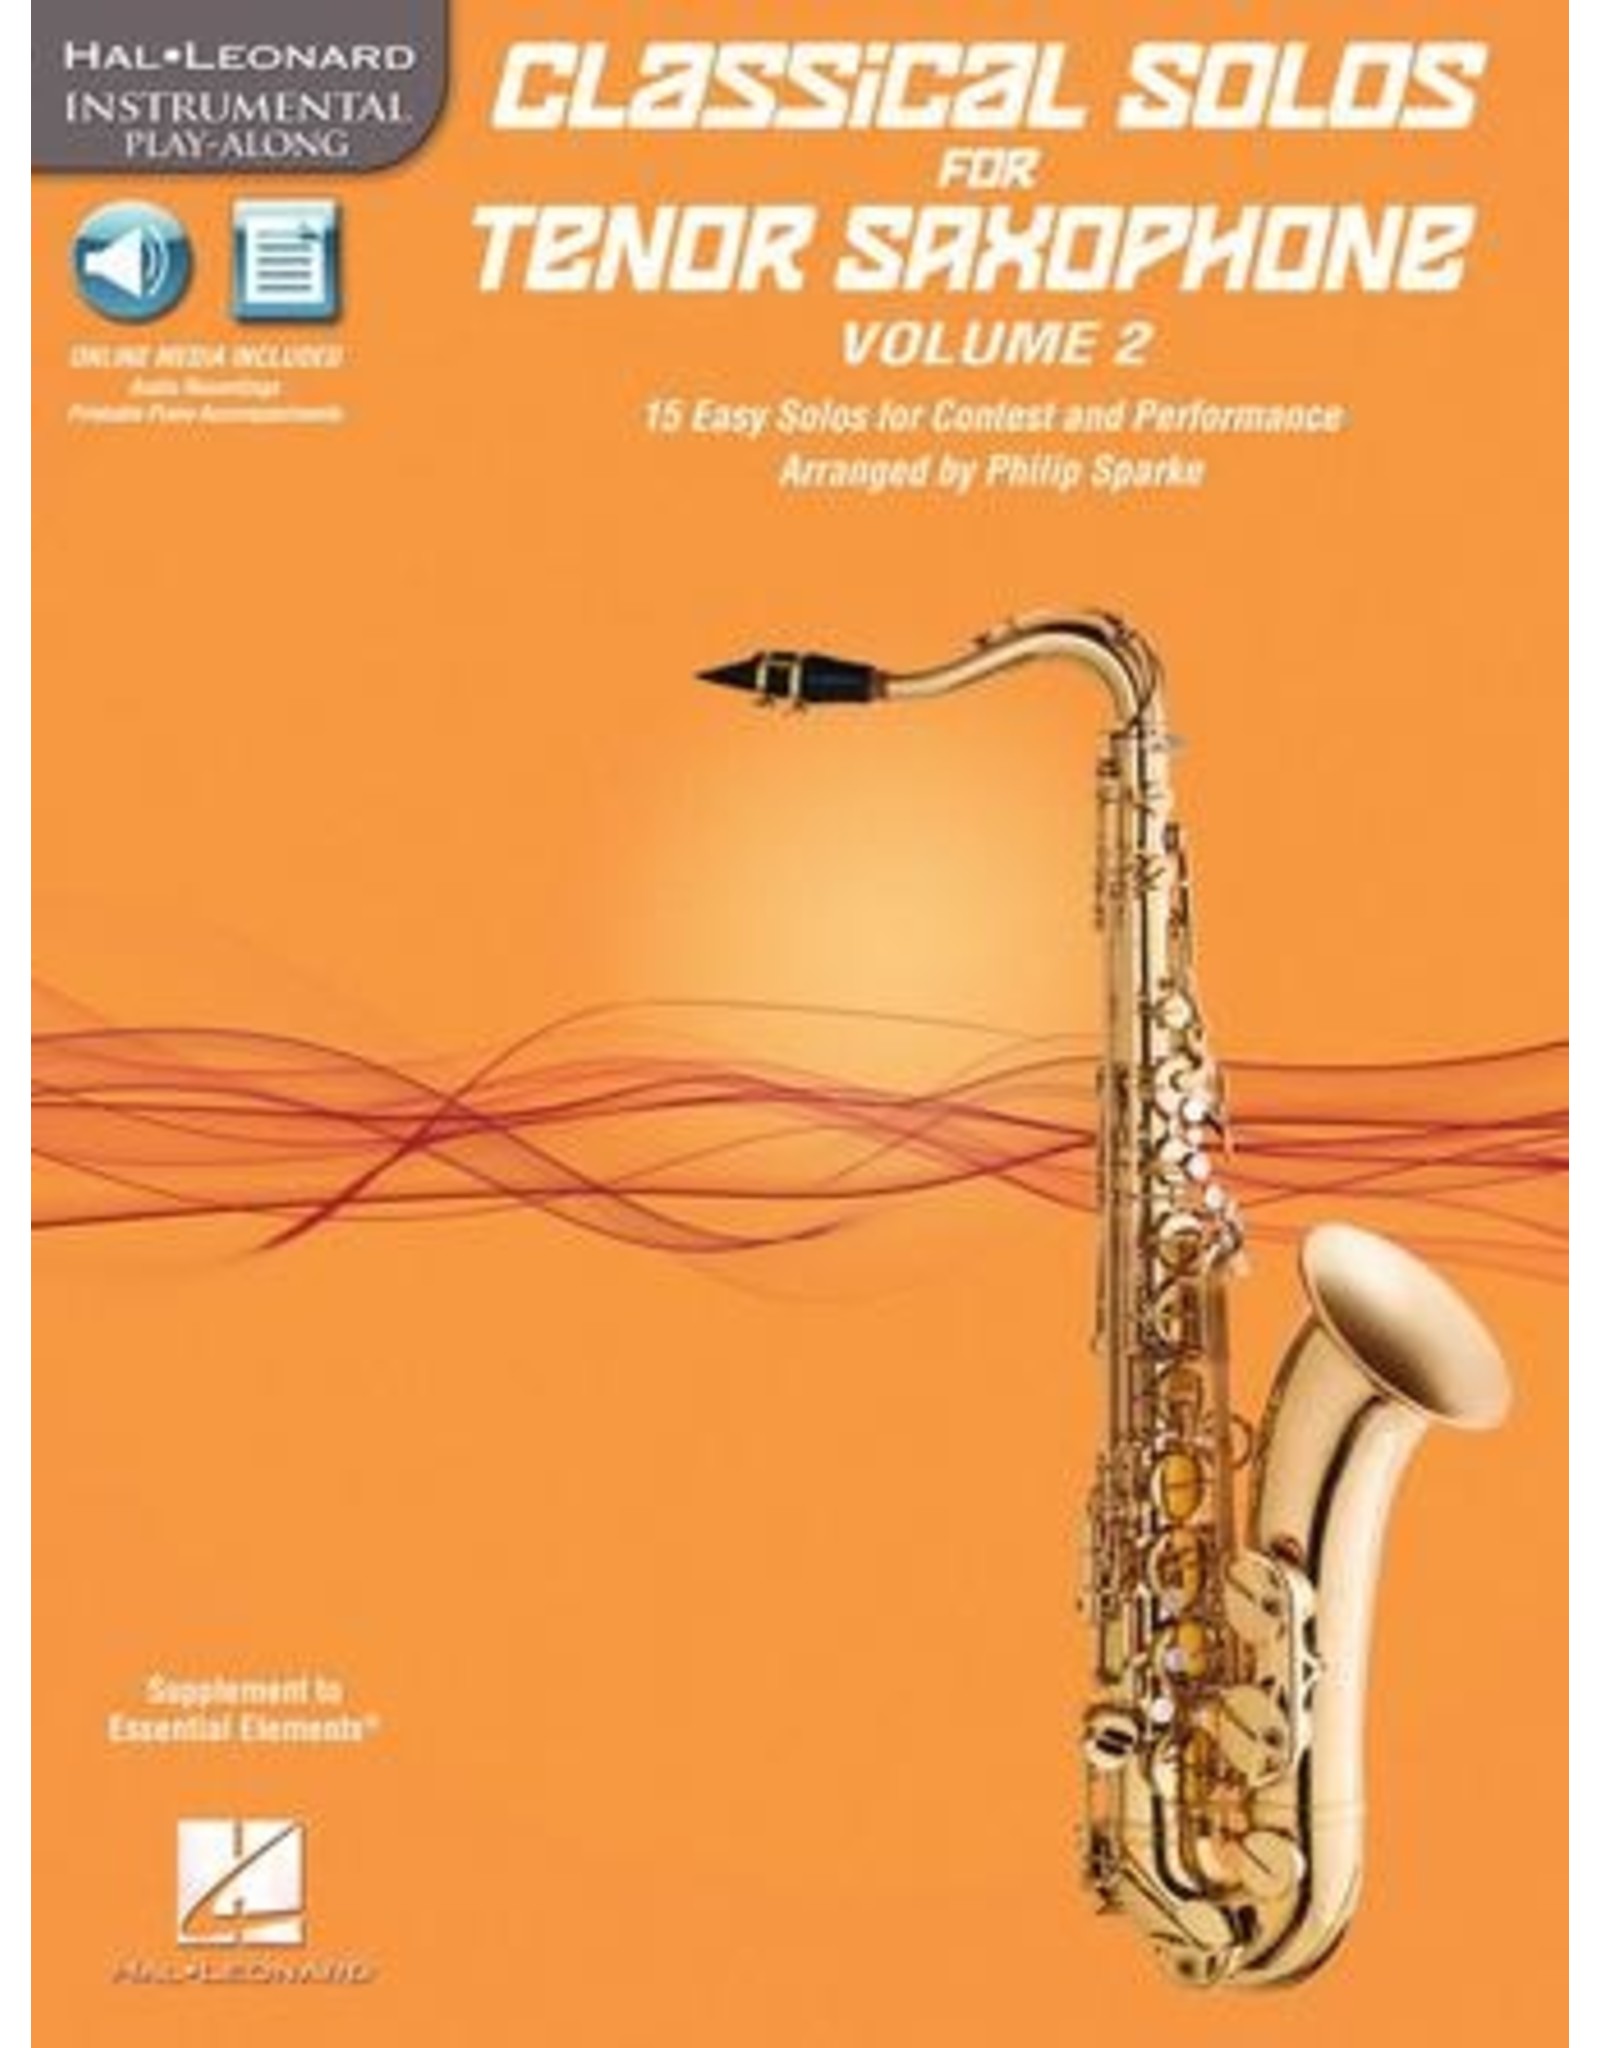 Hal Leonard Classical Solos for Tenor Saxophone, Vol. 2 15 Easy Solos for Contest and Performance arr. Philip Sparke Book/CD Packs Instrumental Folio